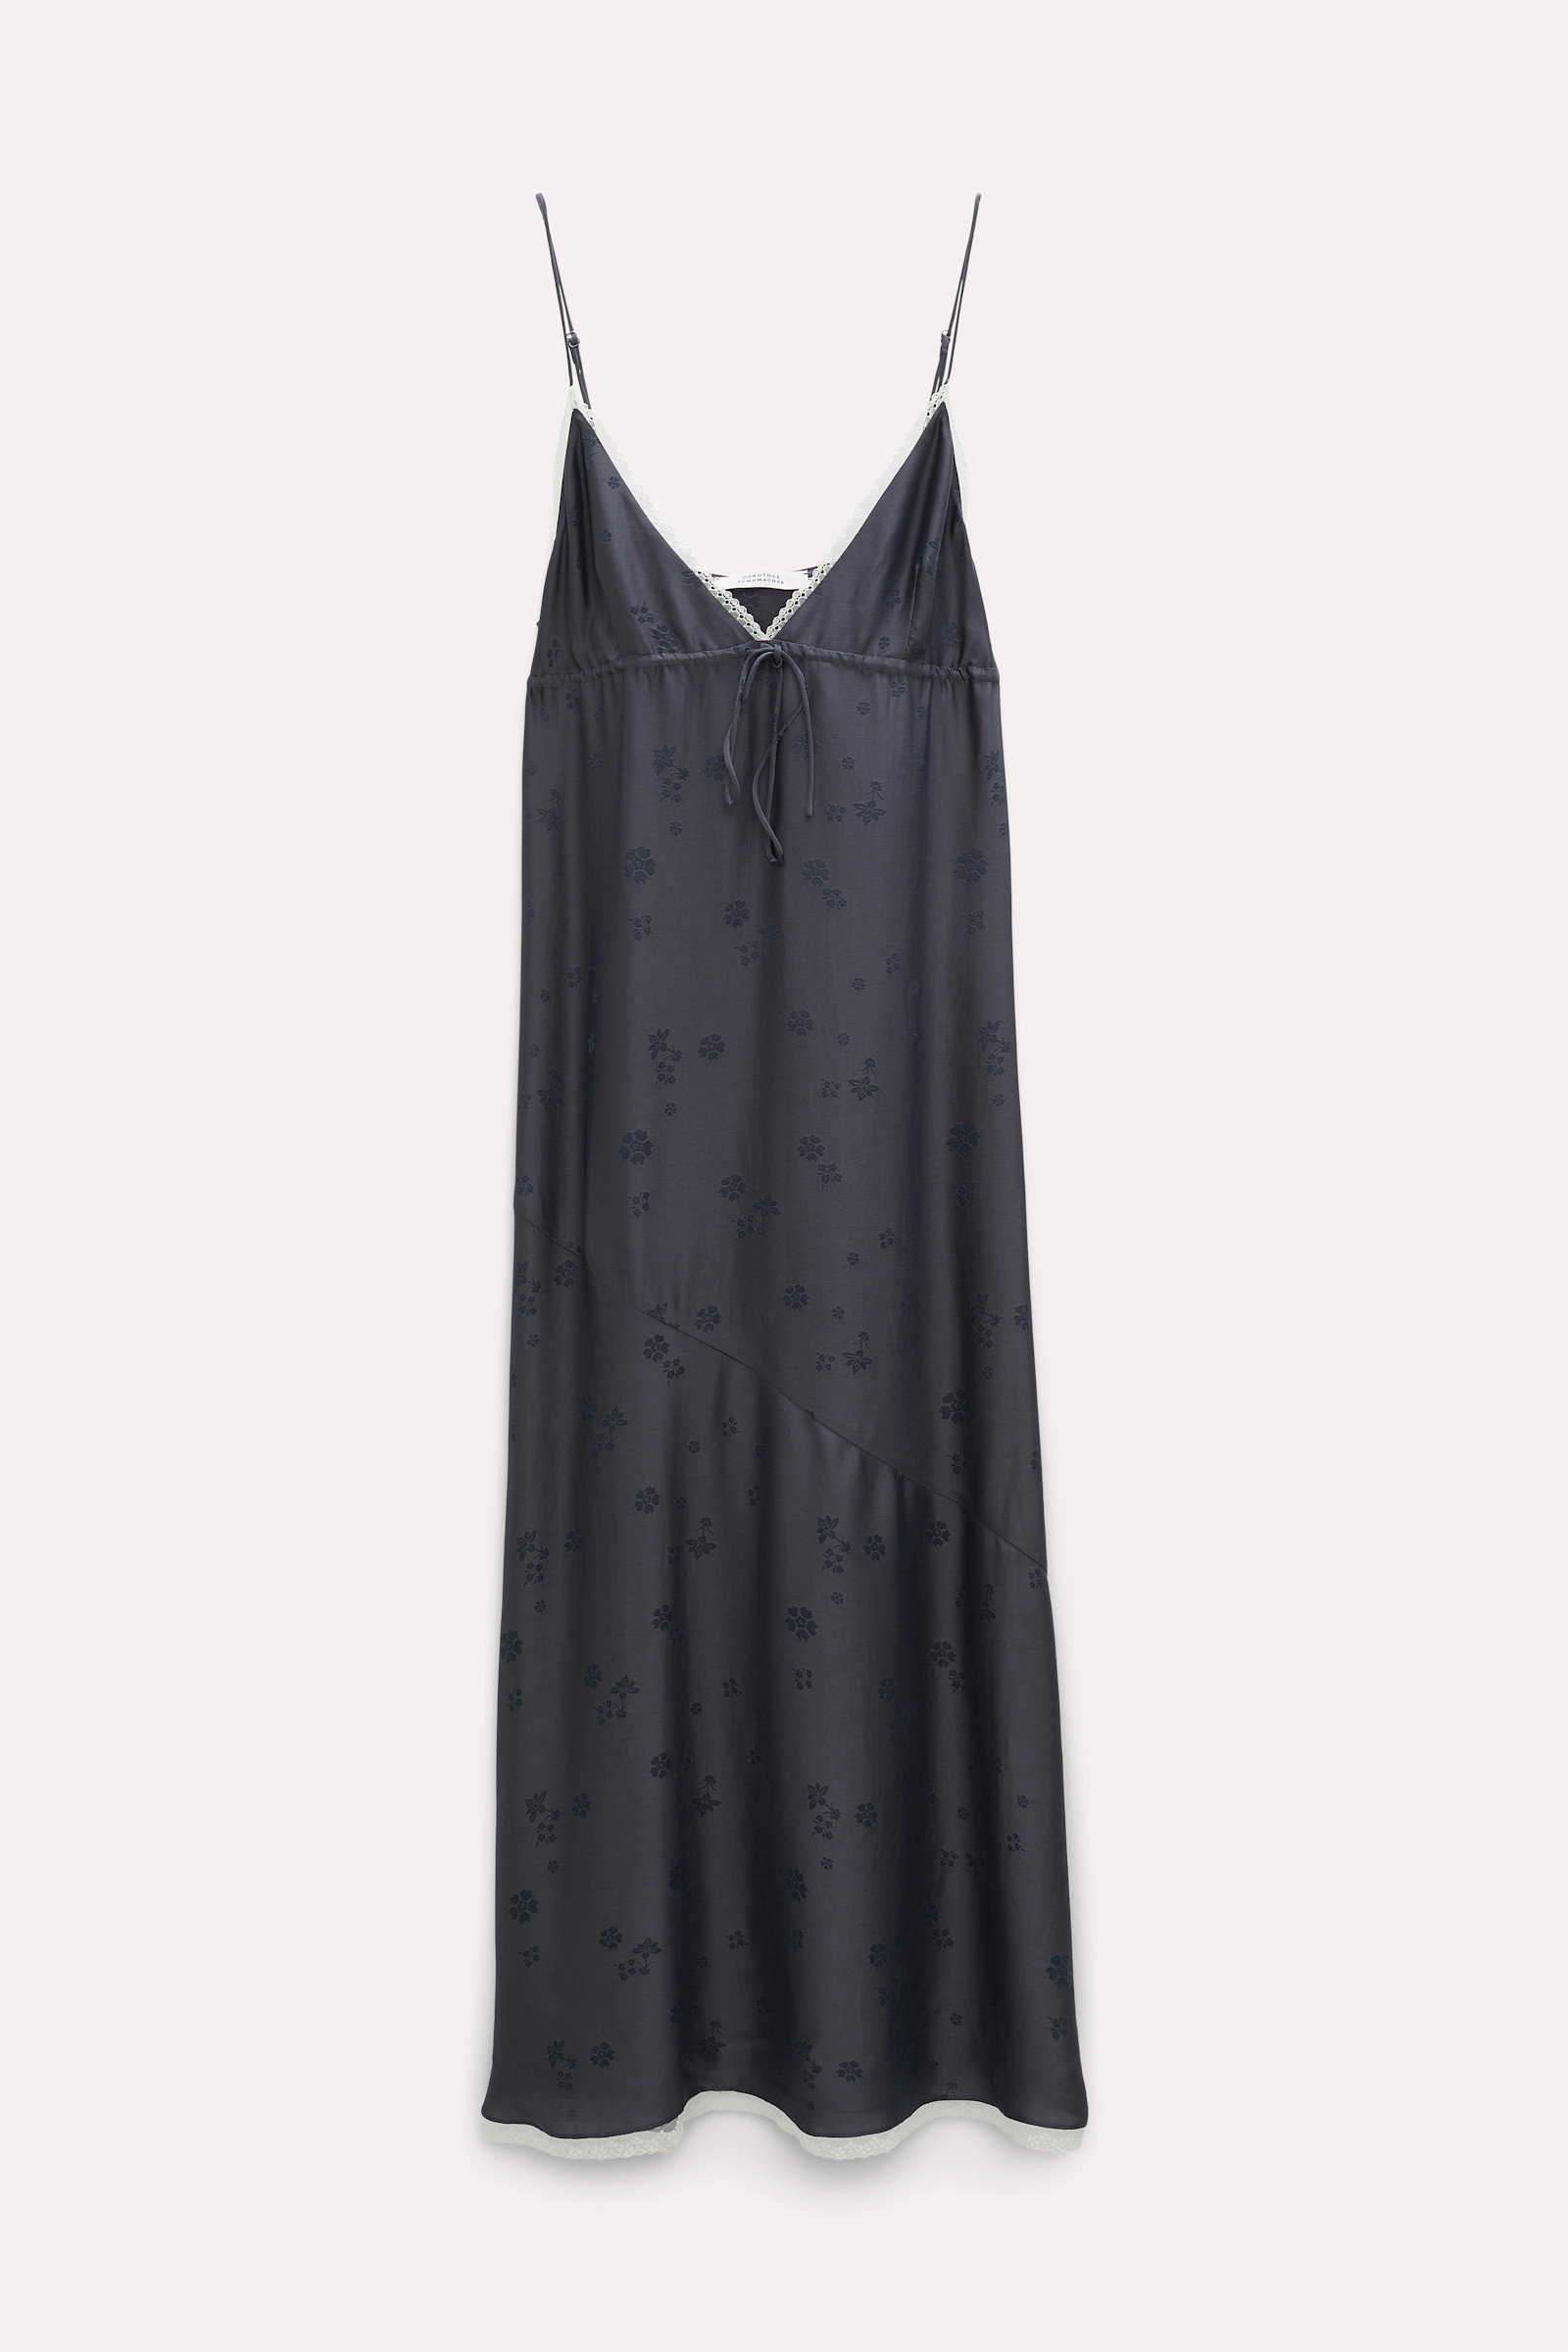 SENSUAL STRUCTURES dress